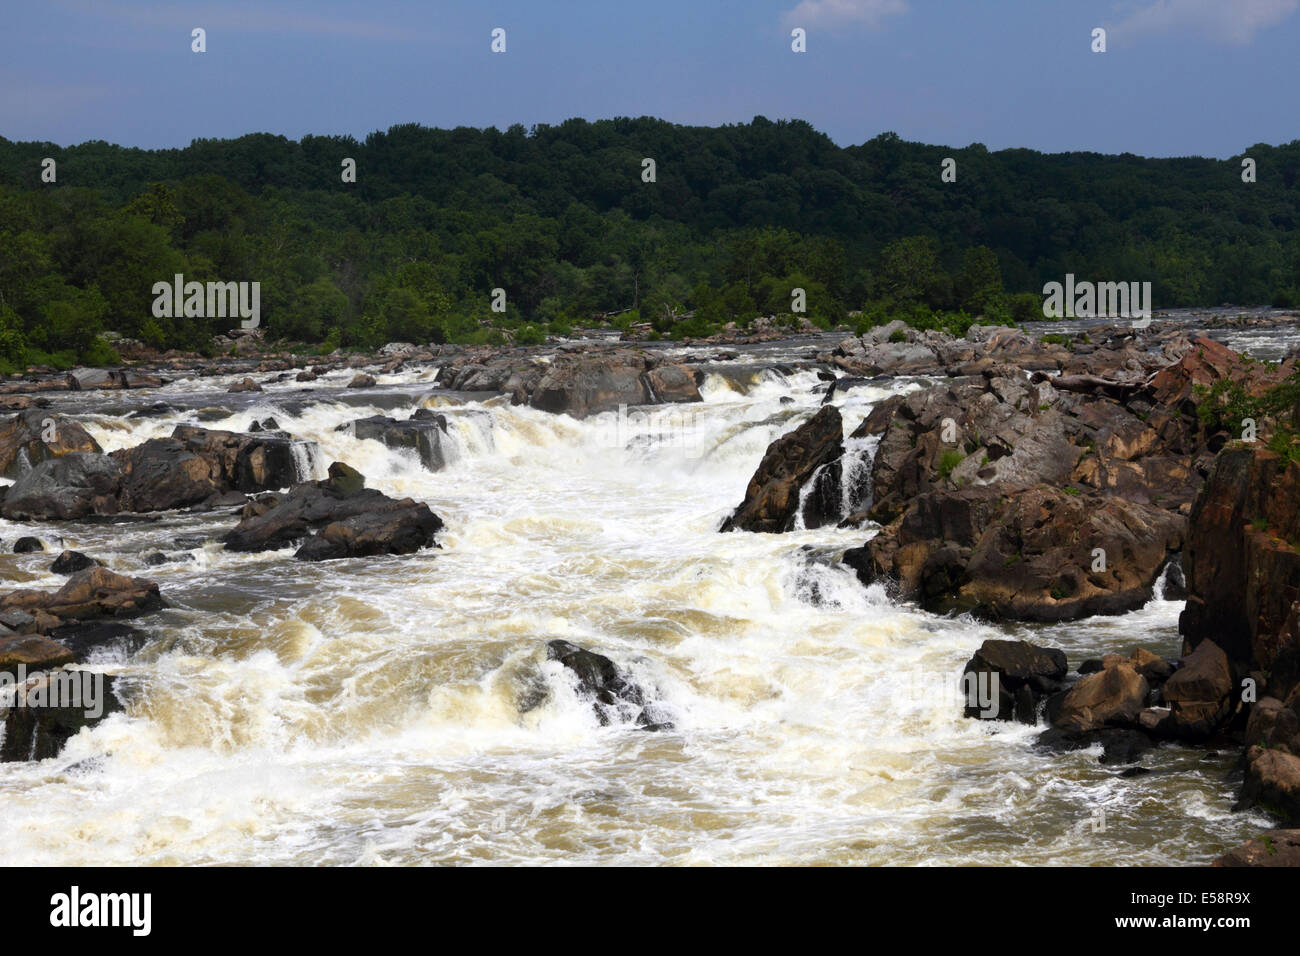 View over Great Falls on Potomac River from viewpoint on Olmsted Island, Maryland, USA Stock Photo